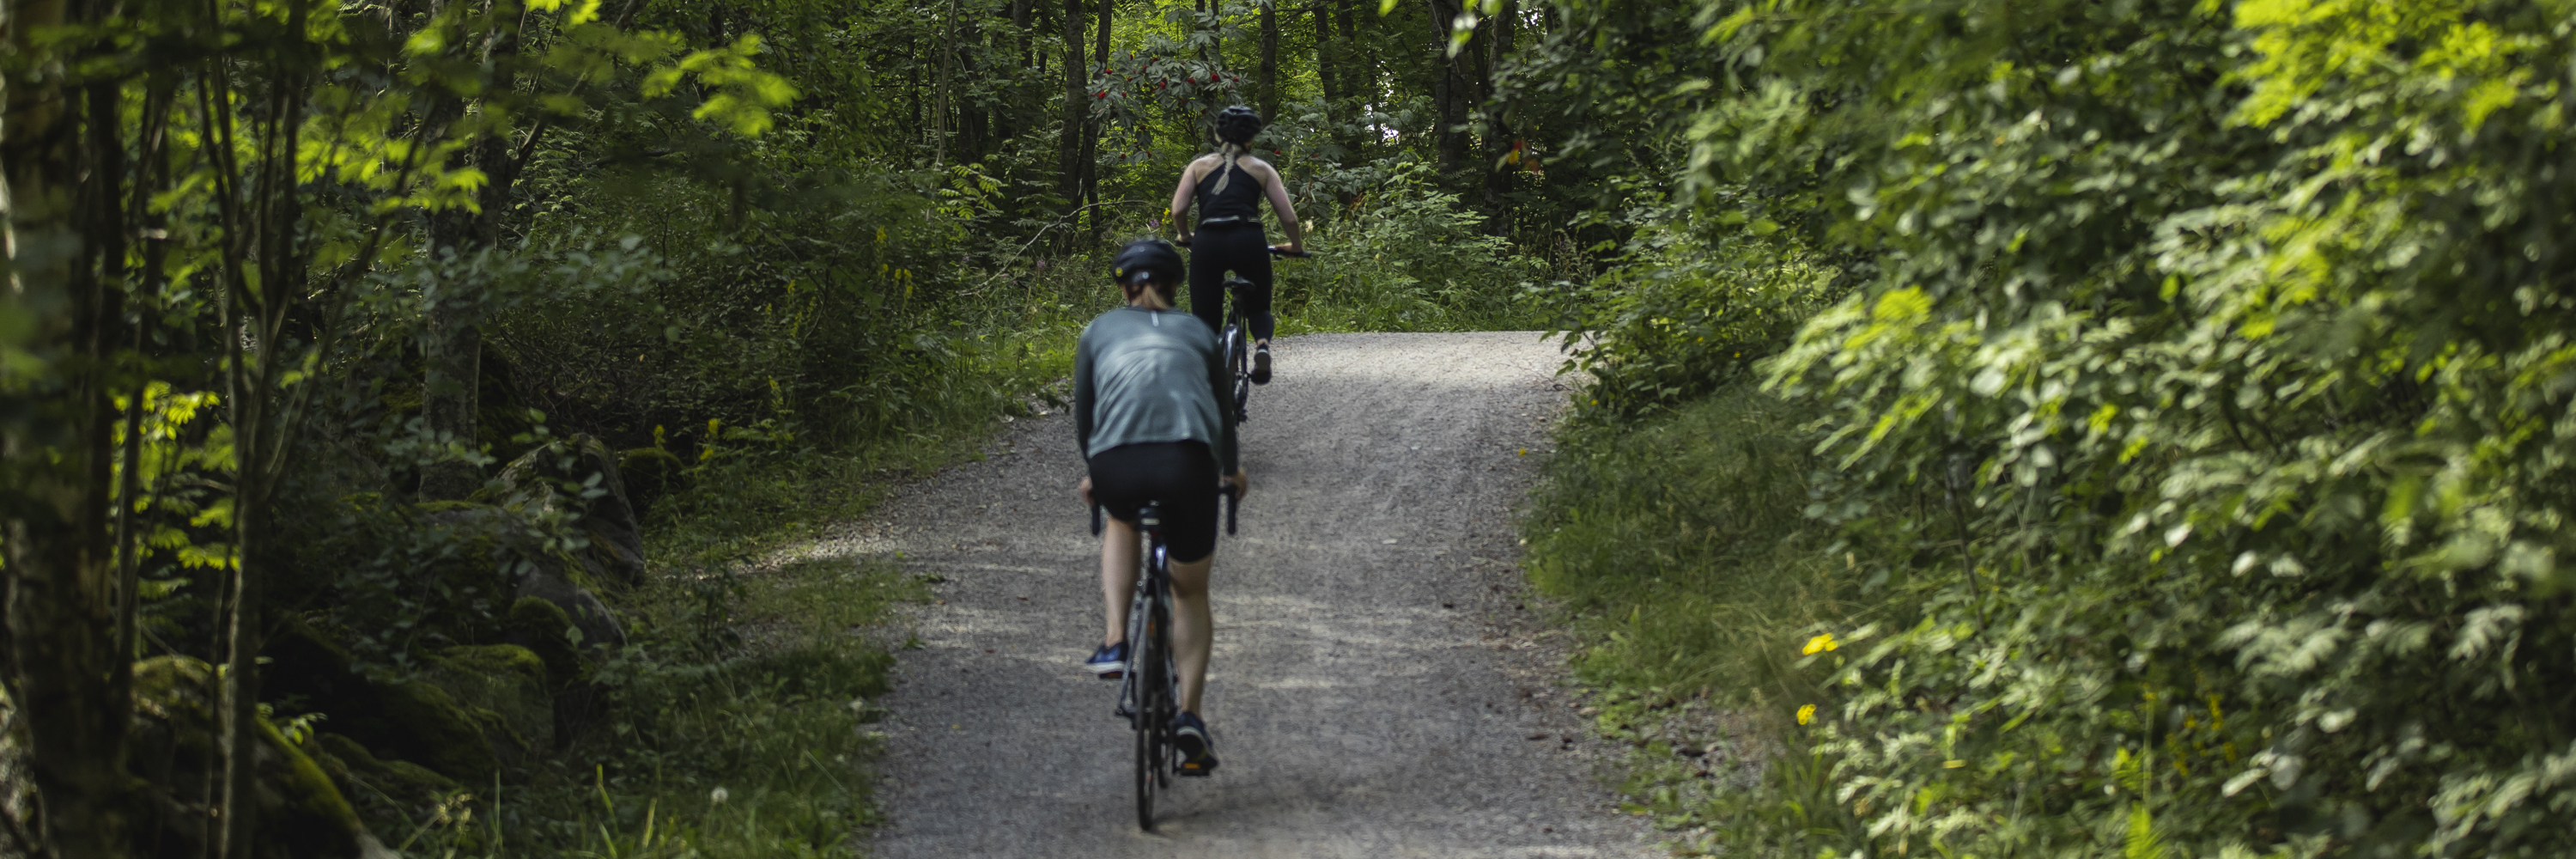 Two cyclists on a gravel road in a forest.